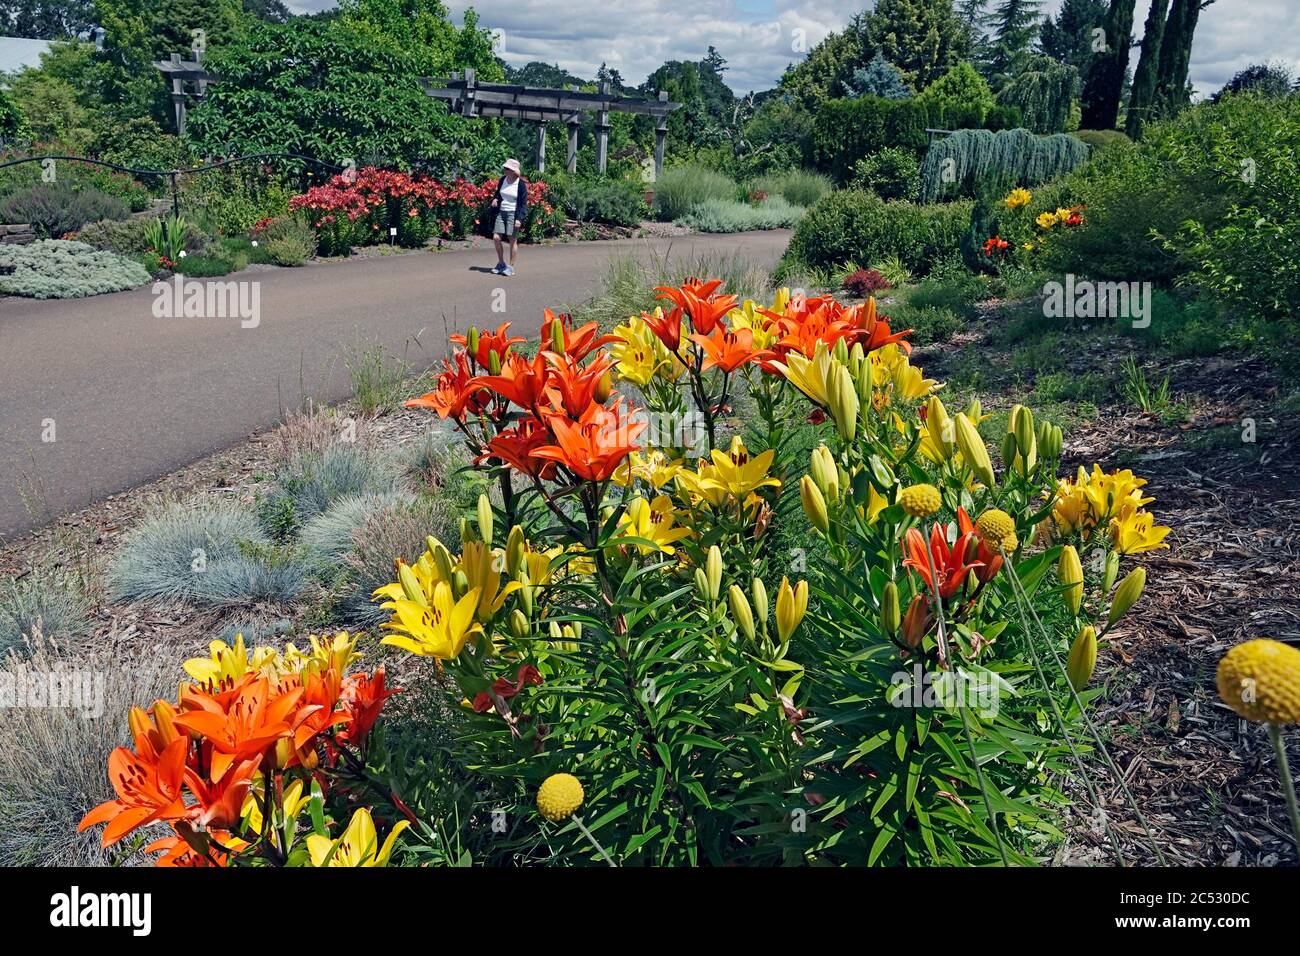 A visitor strolls through the flower displays at the Oregon Garden near the small town of Silverton, Oregon. Stock Photo